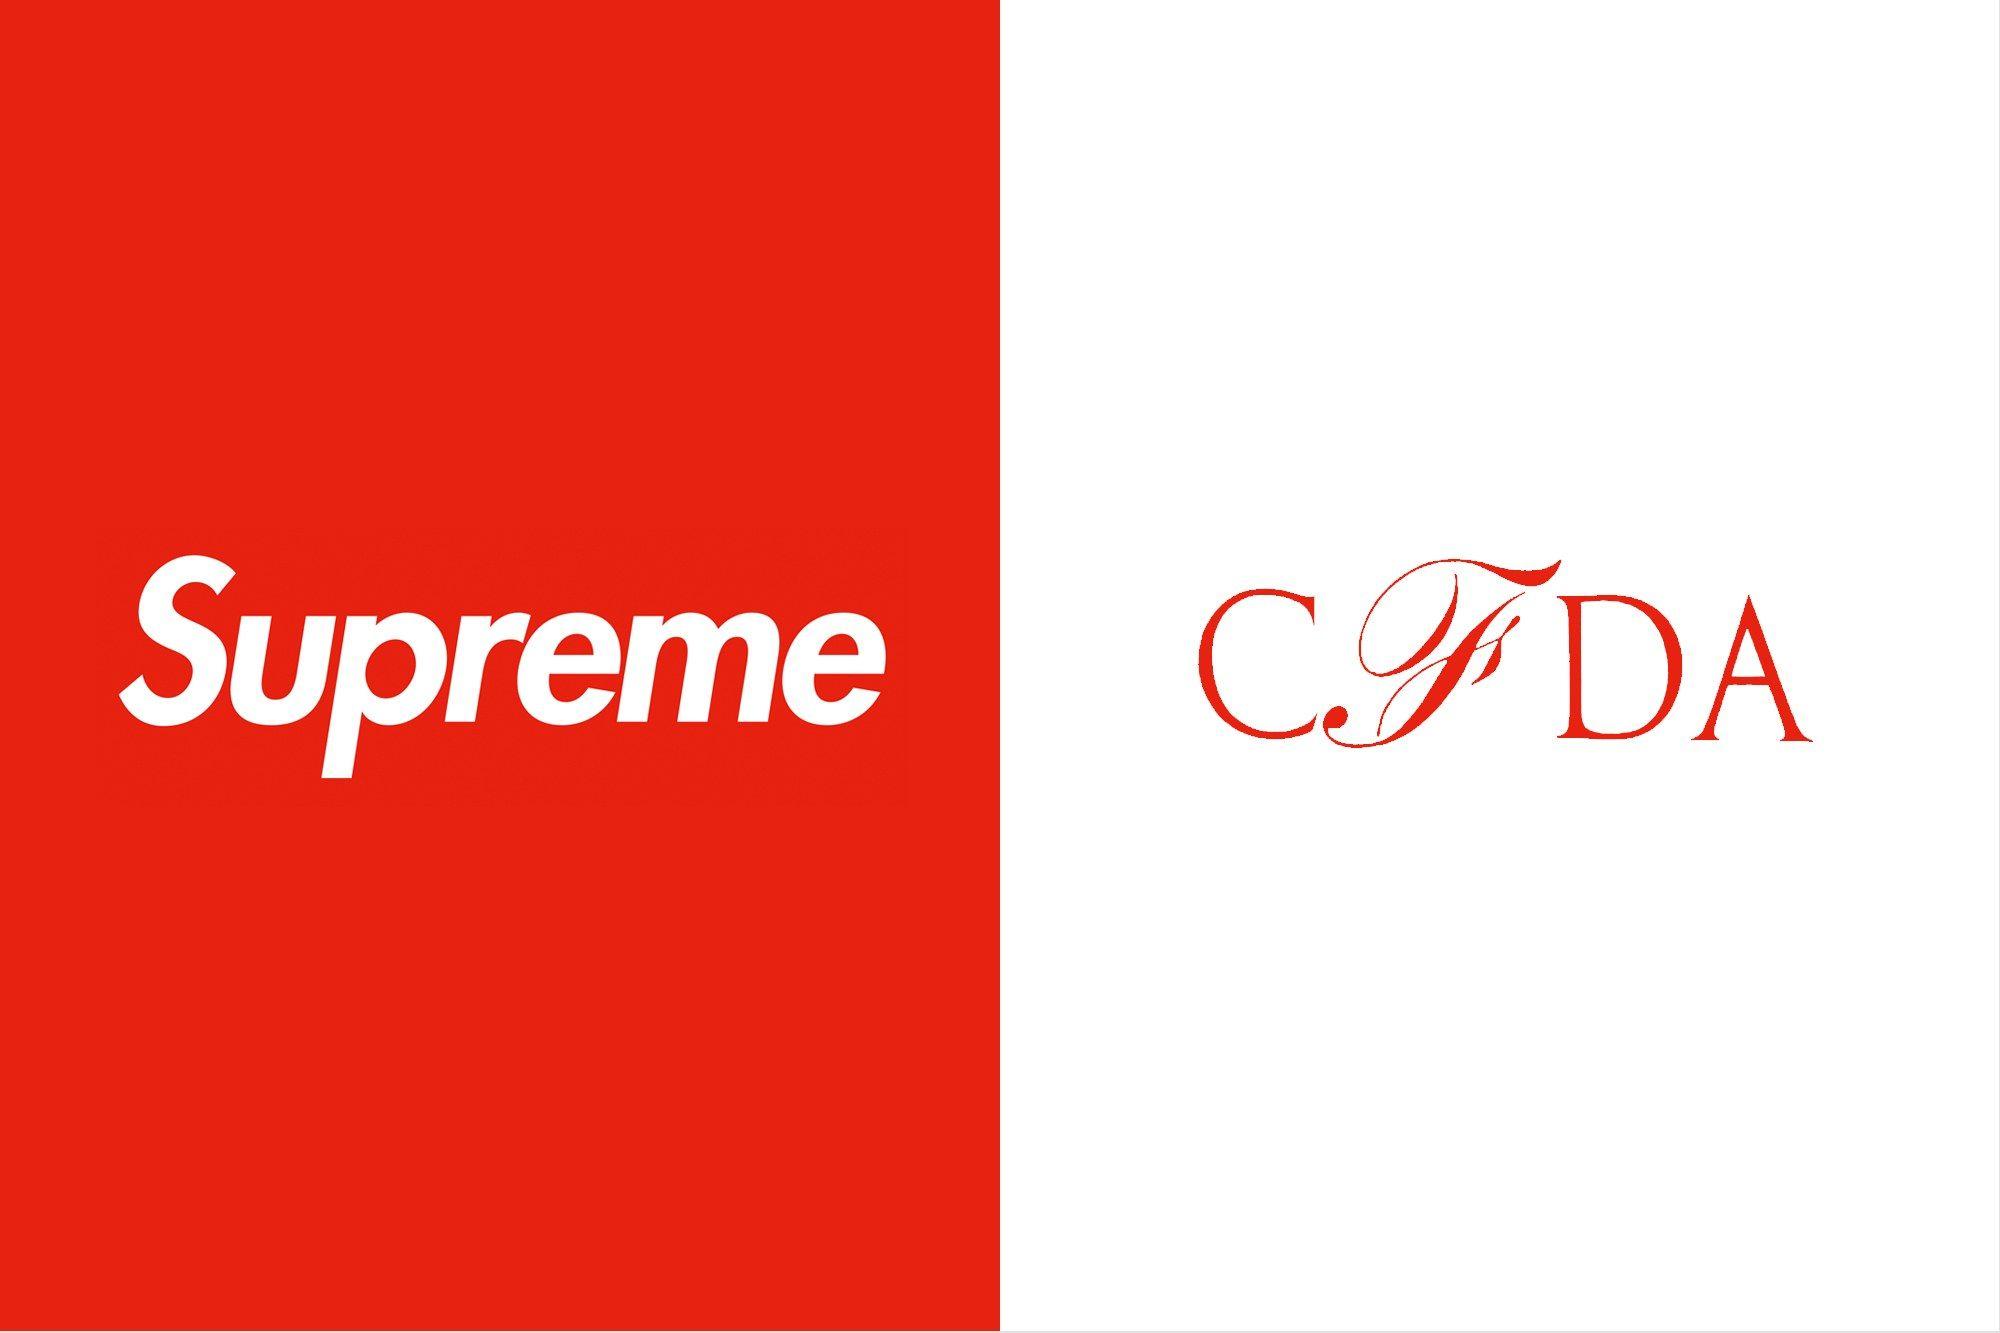 CFDA Logo - Supreme Is Nominated for American Fashion's Biggest Award | GQ